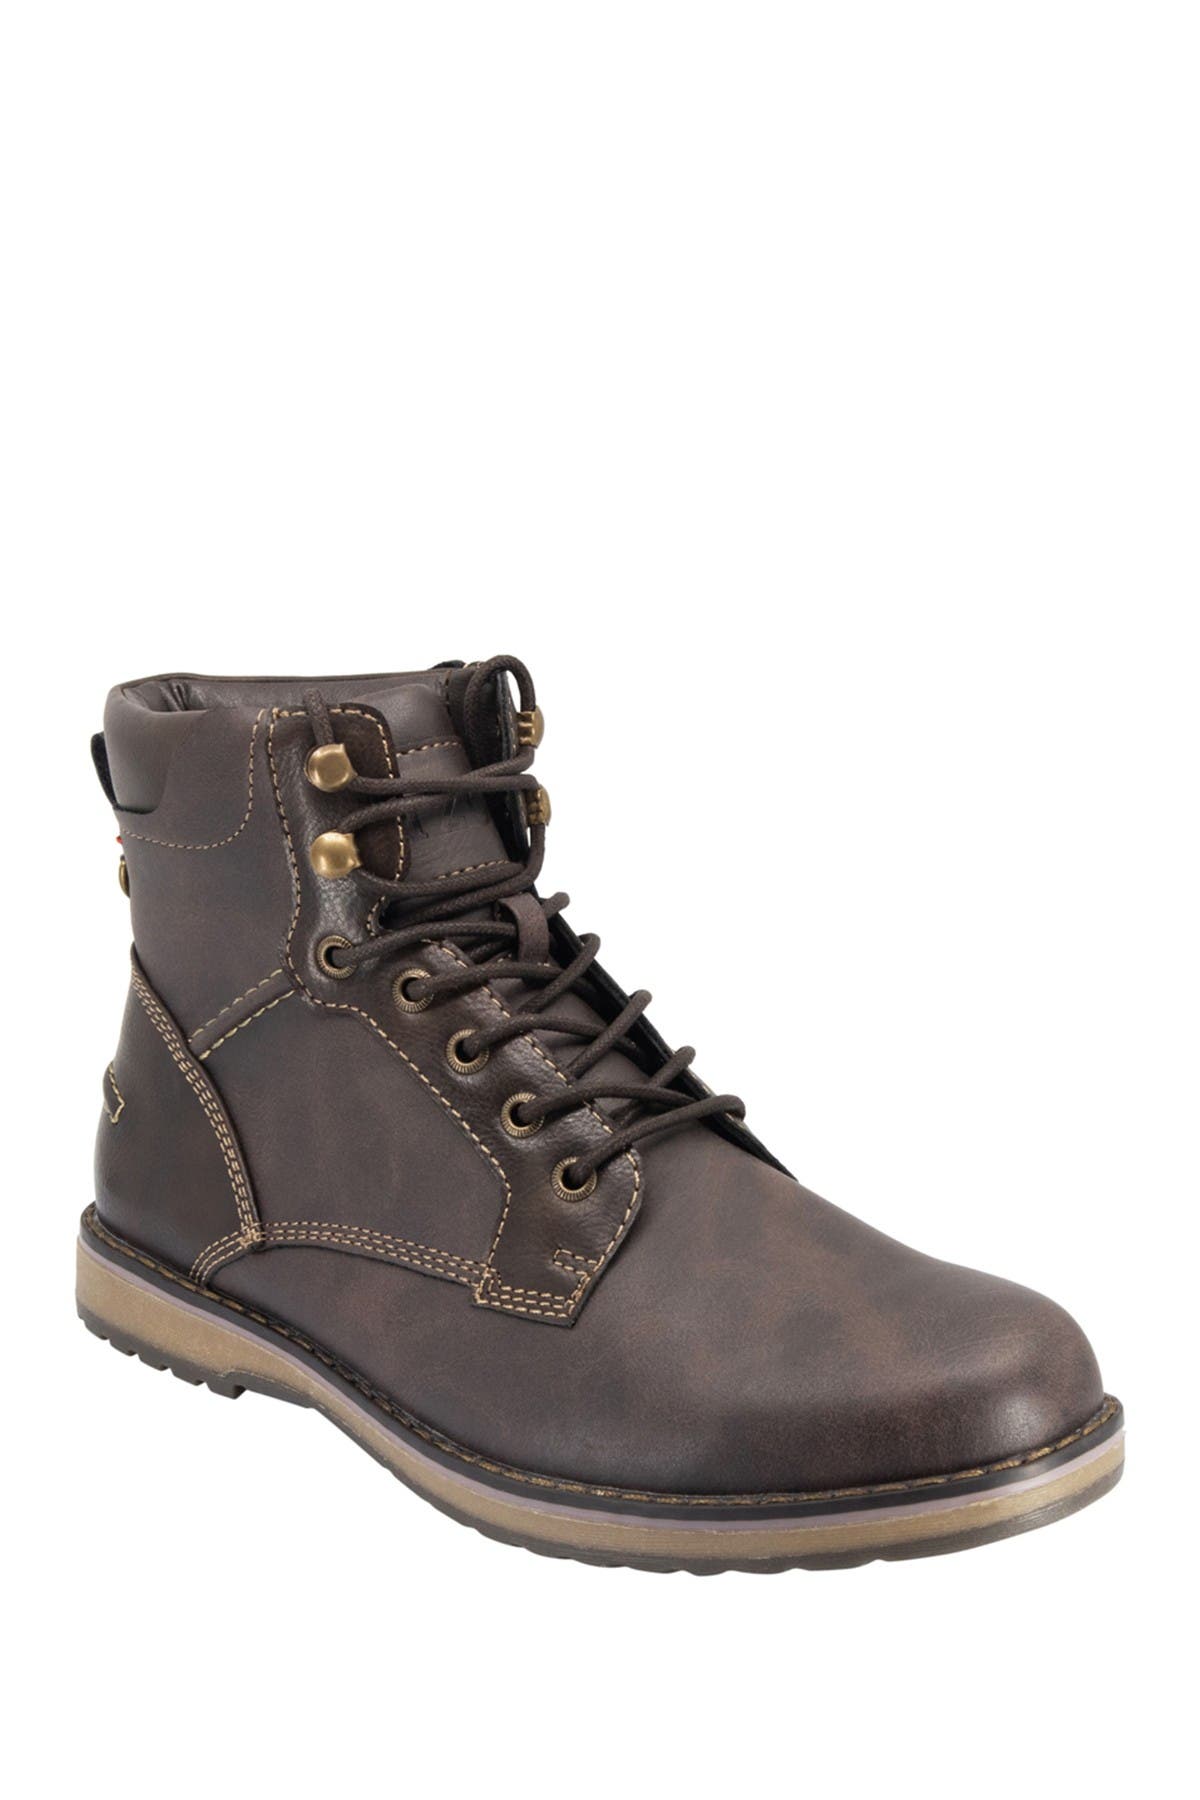 Izod Lonnie Lace-up Boot In Gaucho